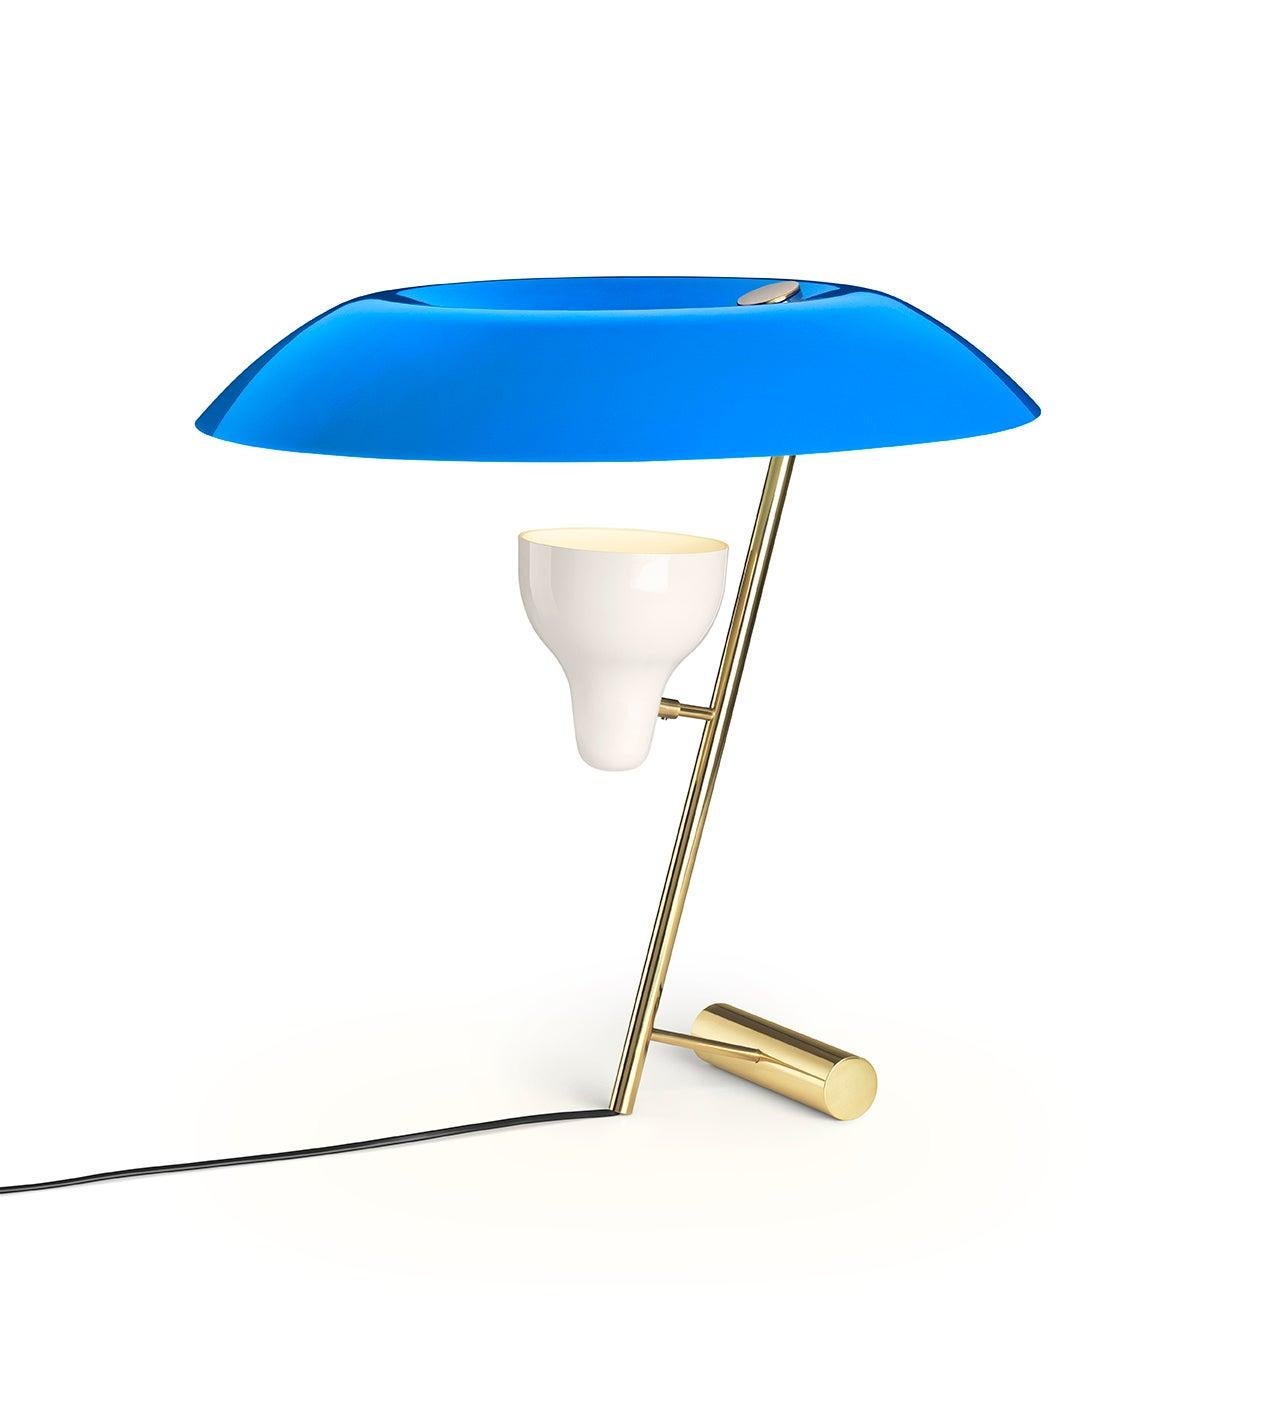 Gino Sarfatti Lamp Model 548 Polished Brass with Blue Difuser by Astep 3